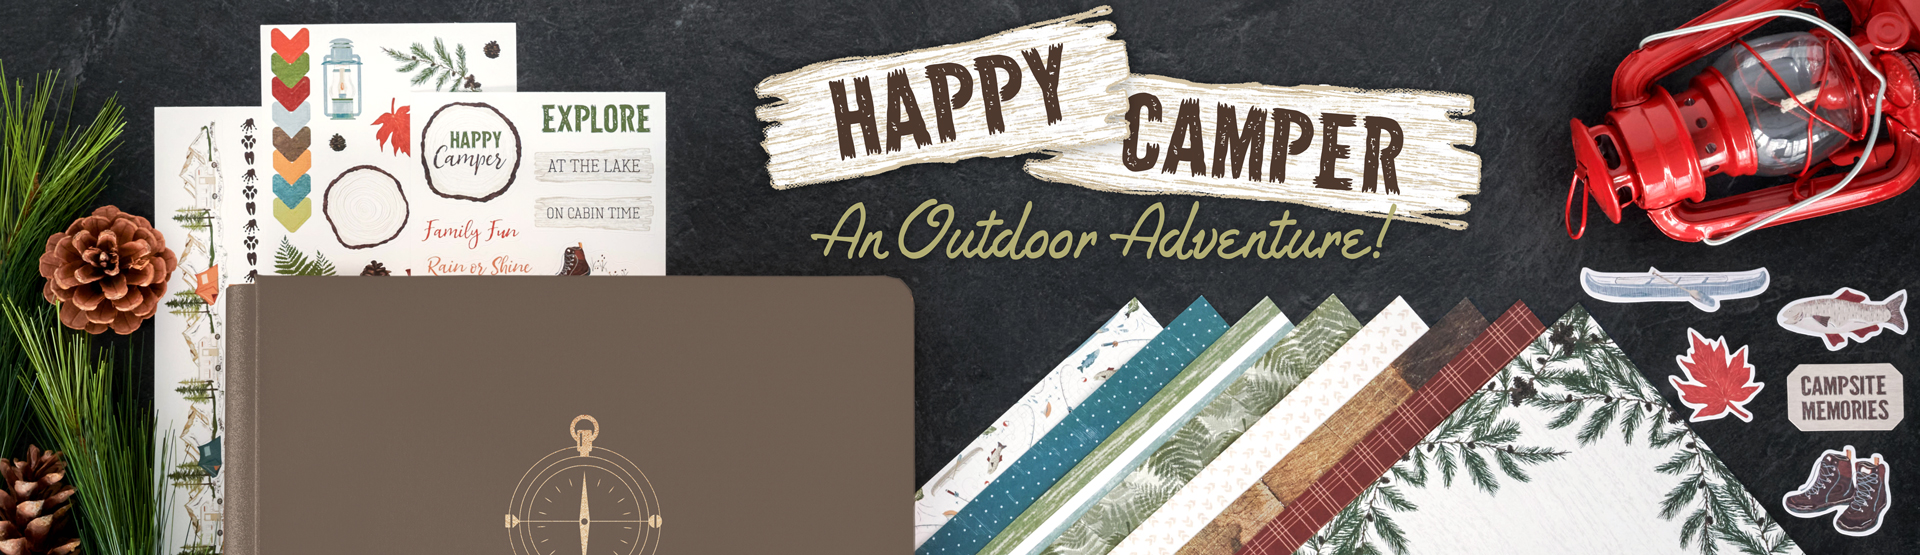 Camping & Outdoors: Happy Camper